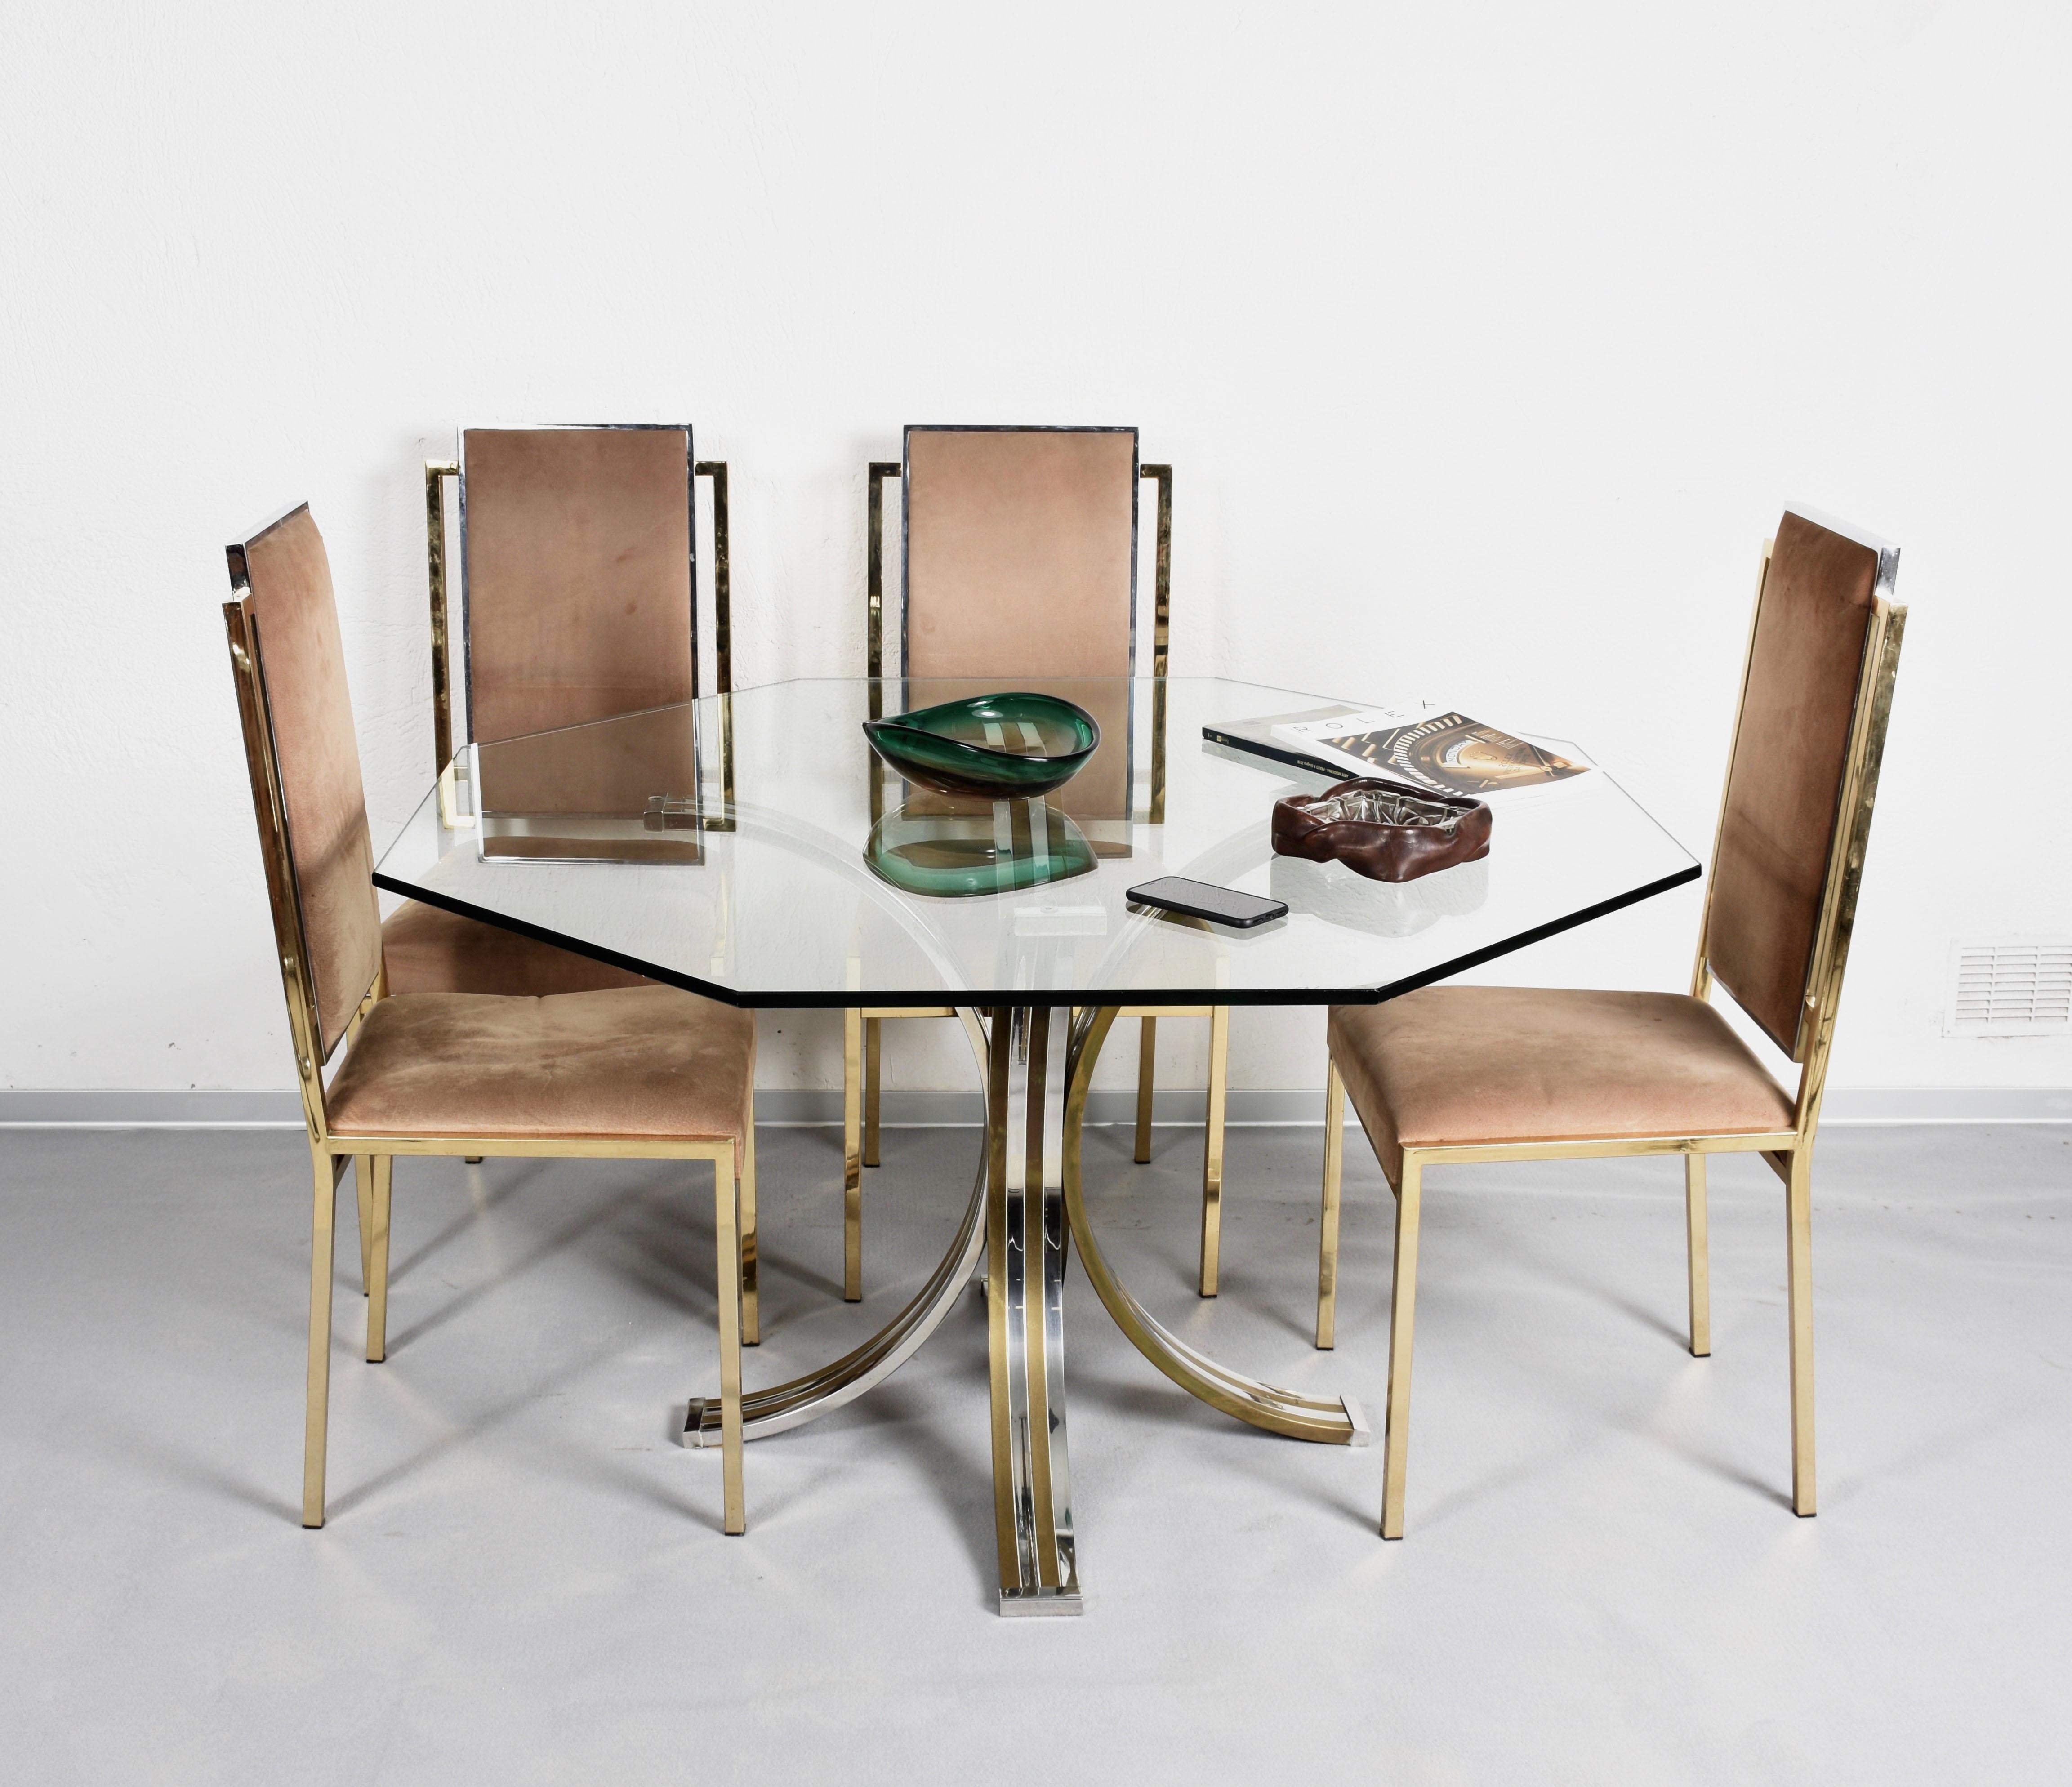 Late 20th Century Brass and Chrome Octagonal Glass Italian Dining Table after Romeo Rega, 1970s For Sale